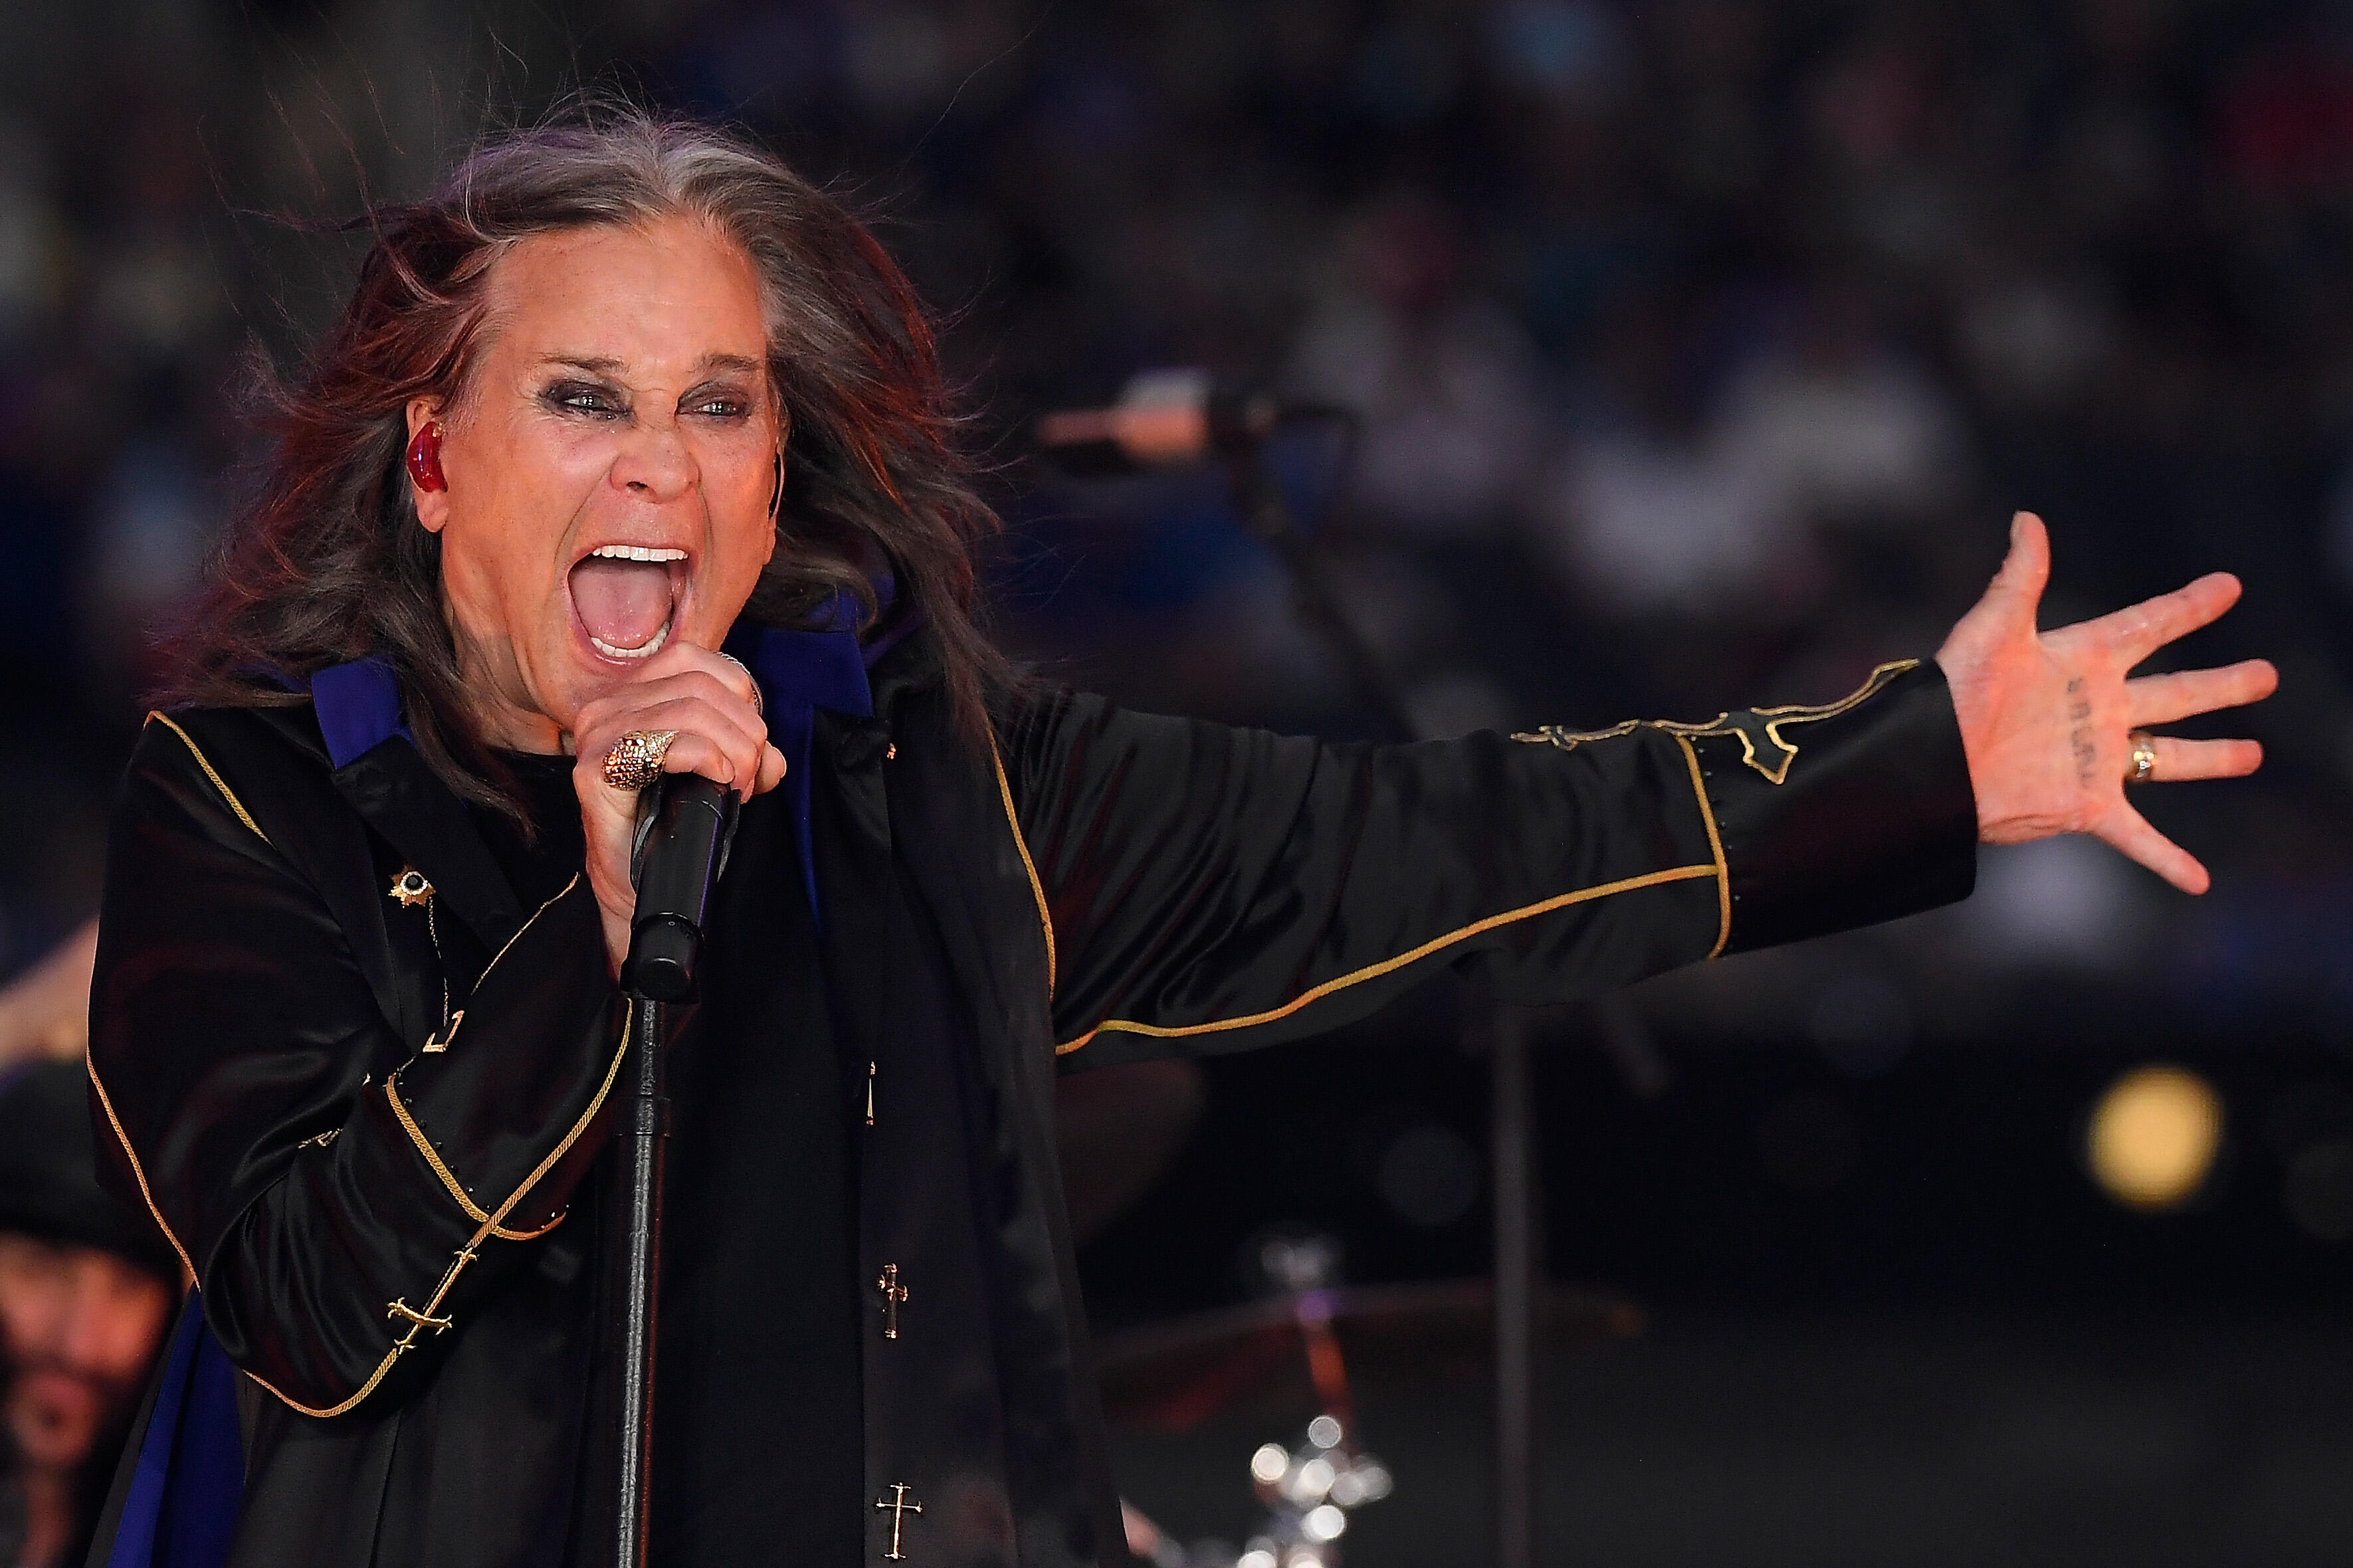 Ozzy Osbourne Releases Video Of NFL Halftime Show NBC Cut After 10